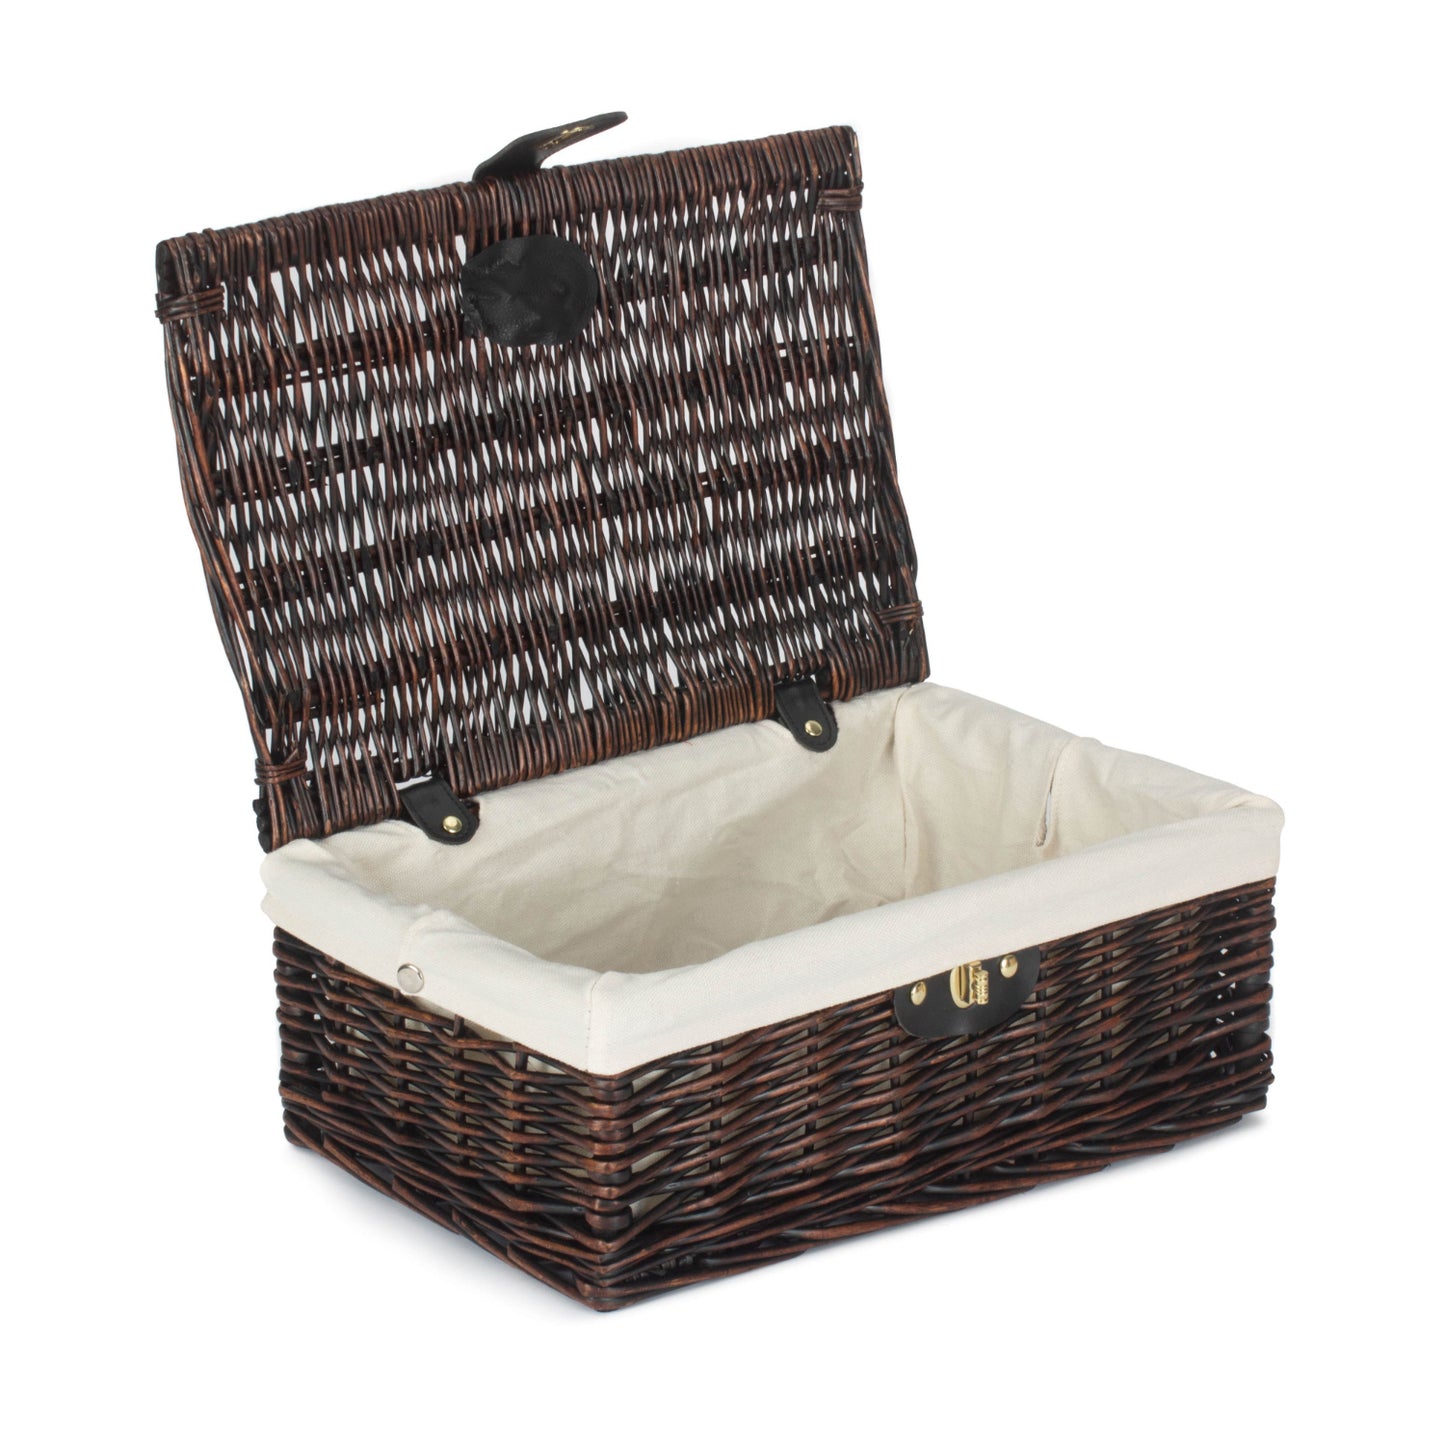 14 Inch Chocolate Brown Hamper With White Lining